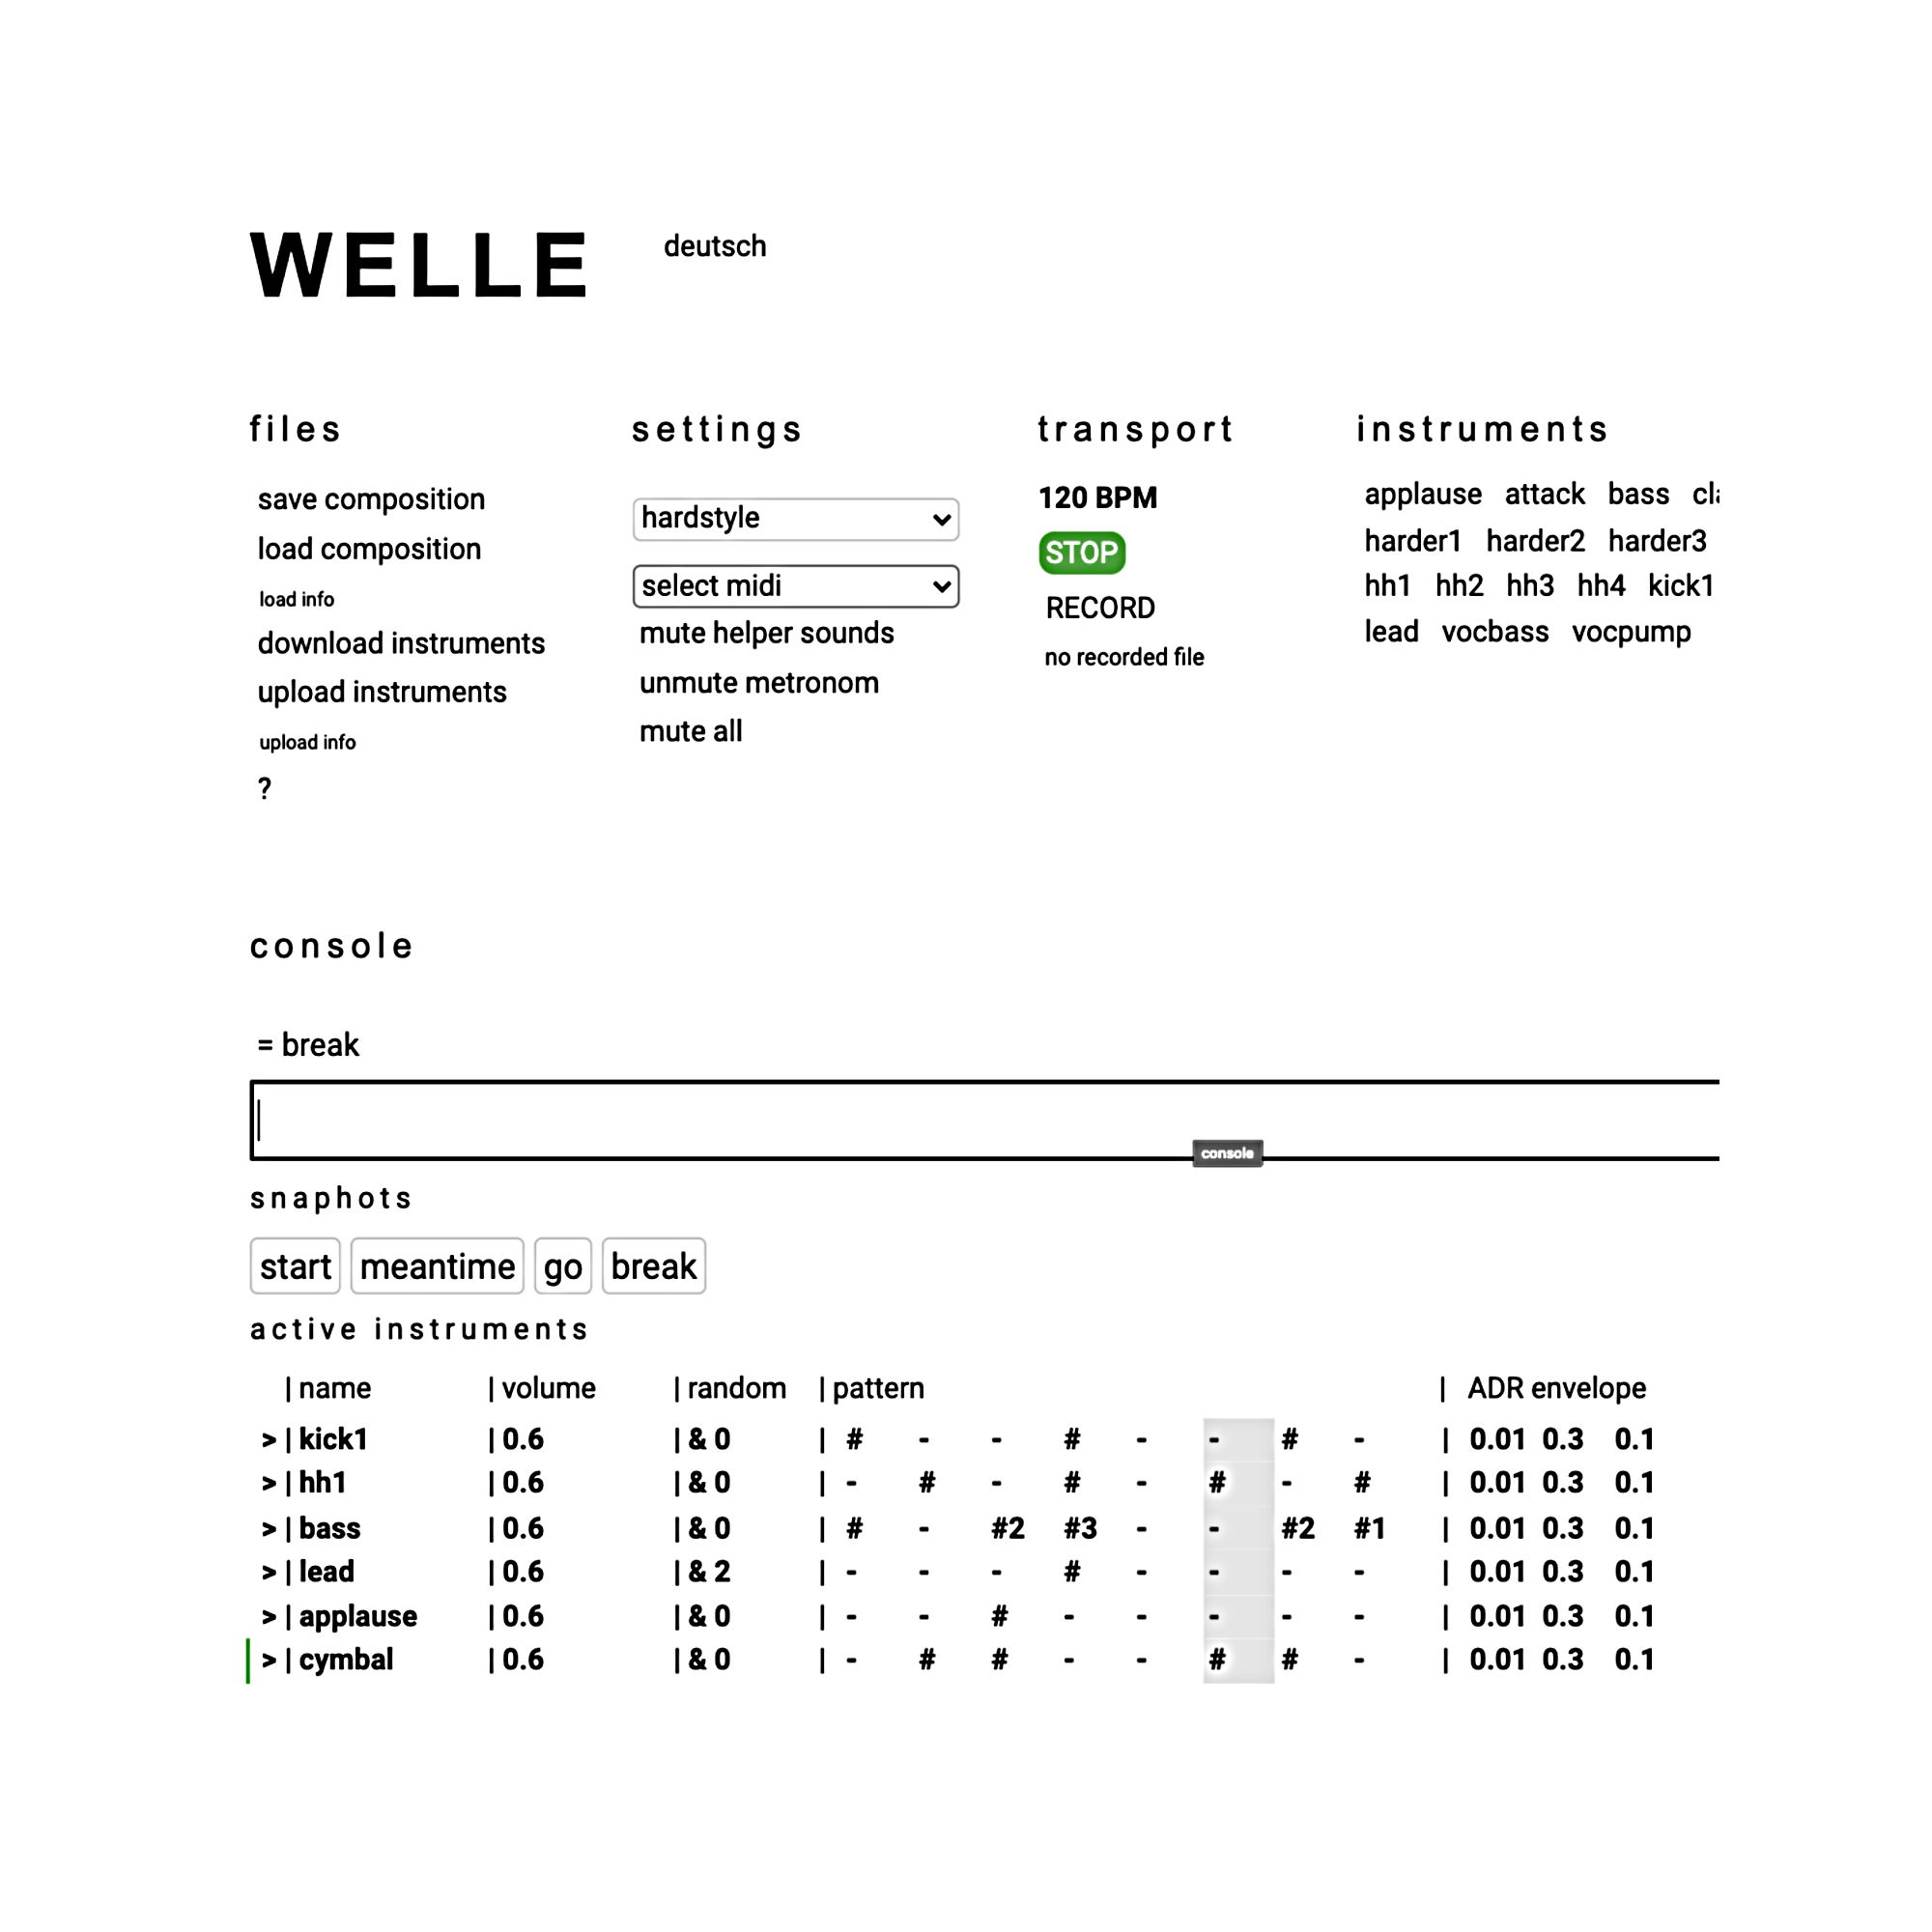 Welle - a web-based music environment